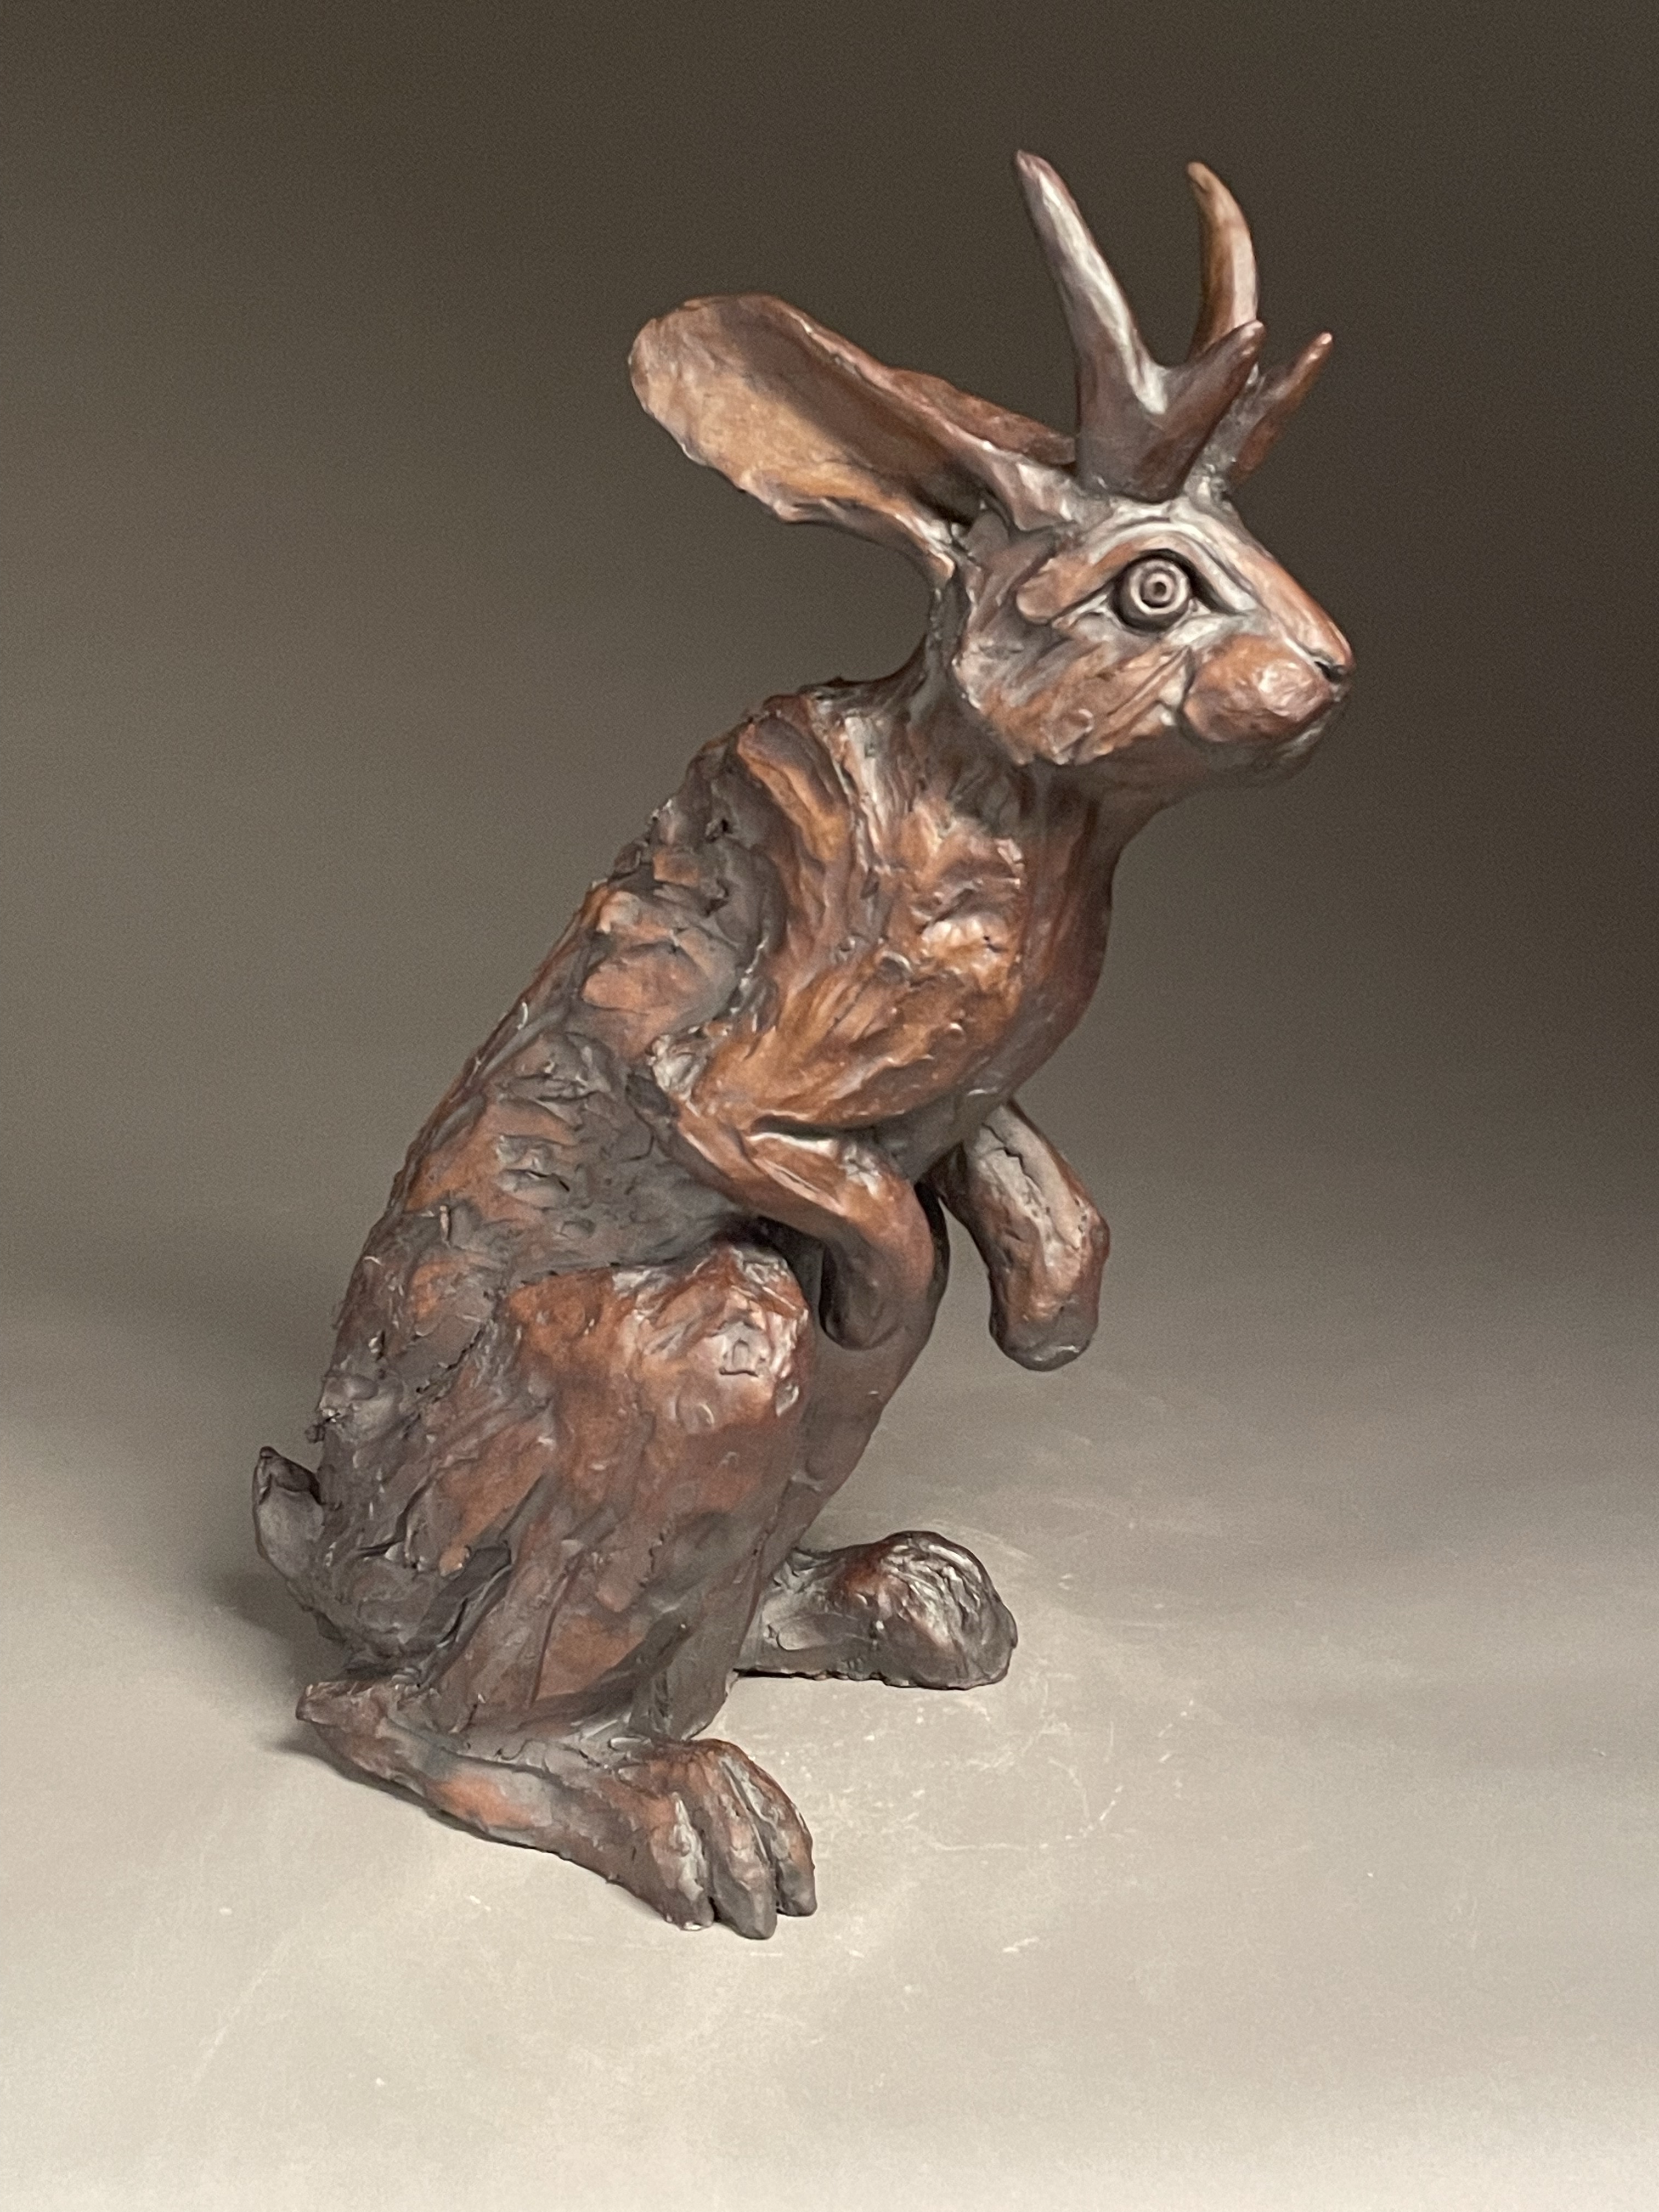 Ceramic jackalope sculpture standing on its back legs with a red oxide glaze